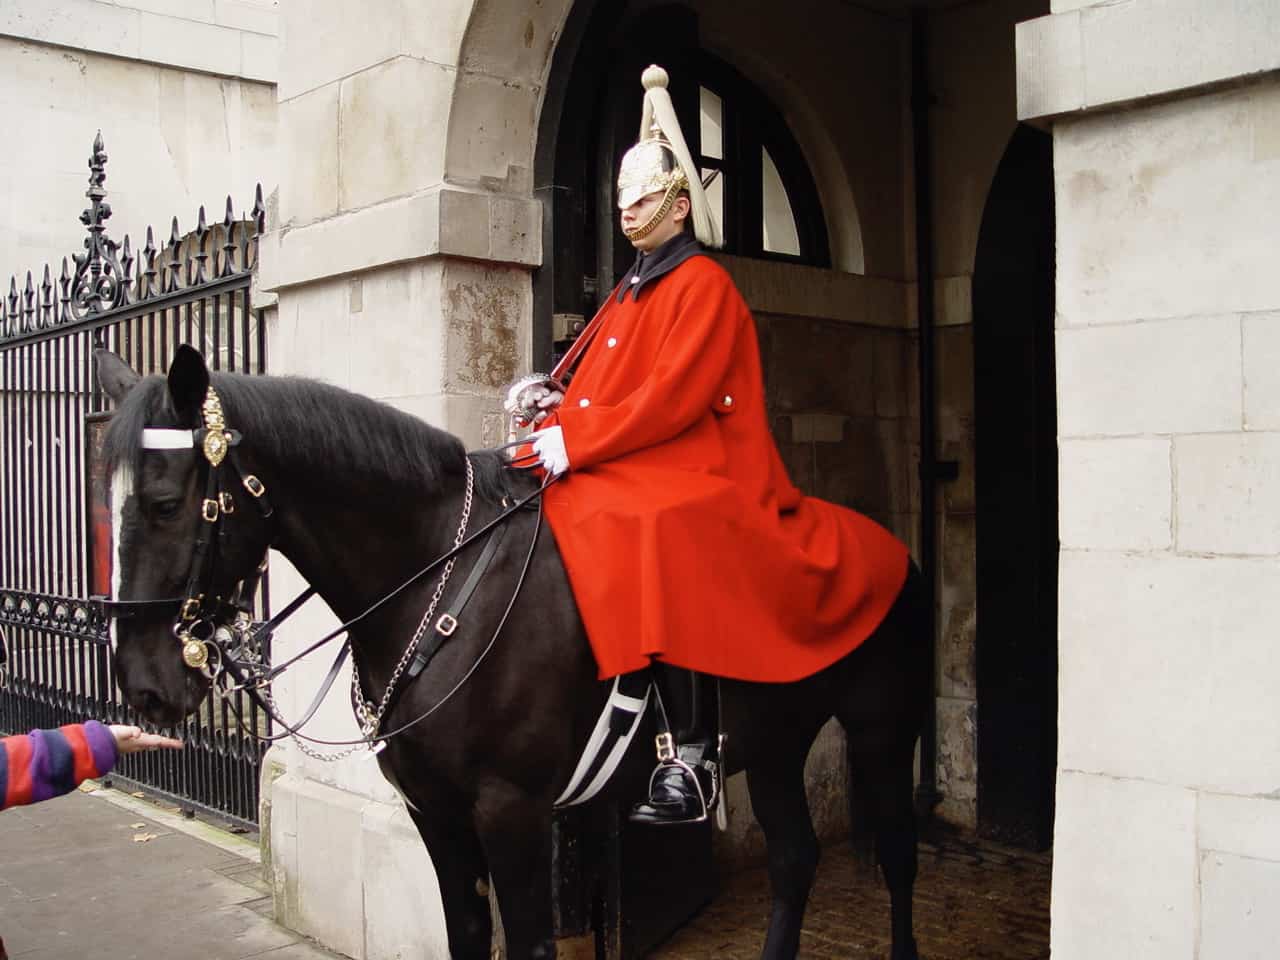 Mounted trooper from the King's Life Guard in Westminster, London, England